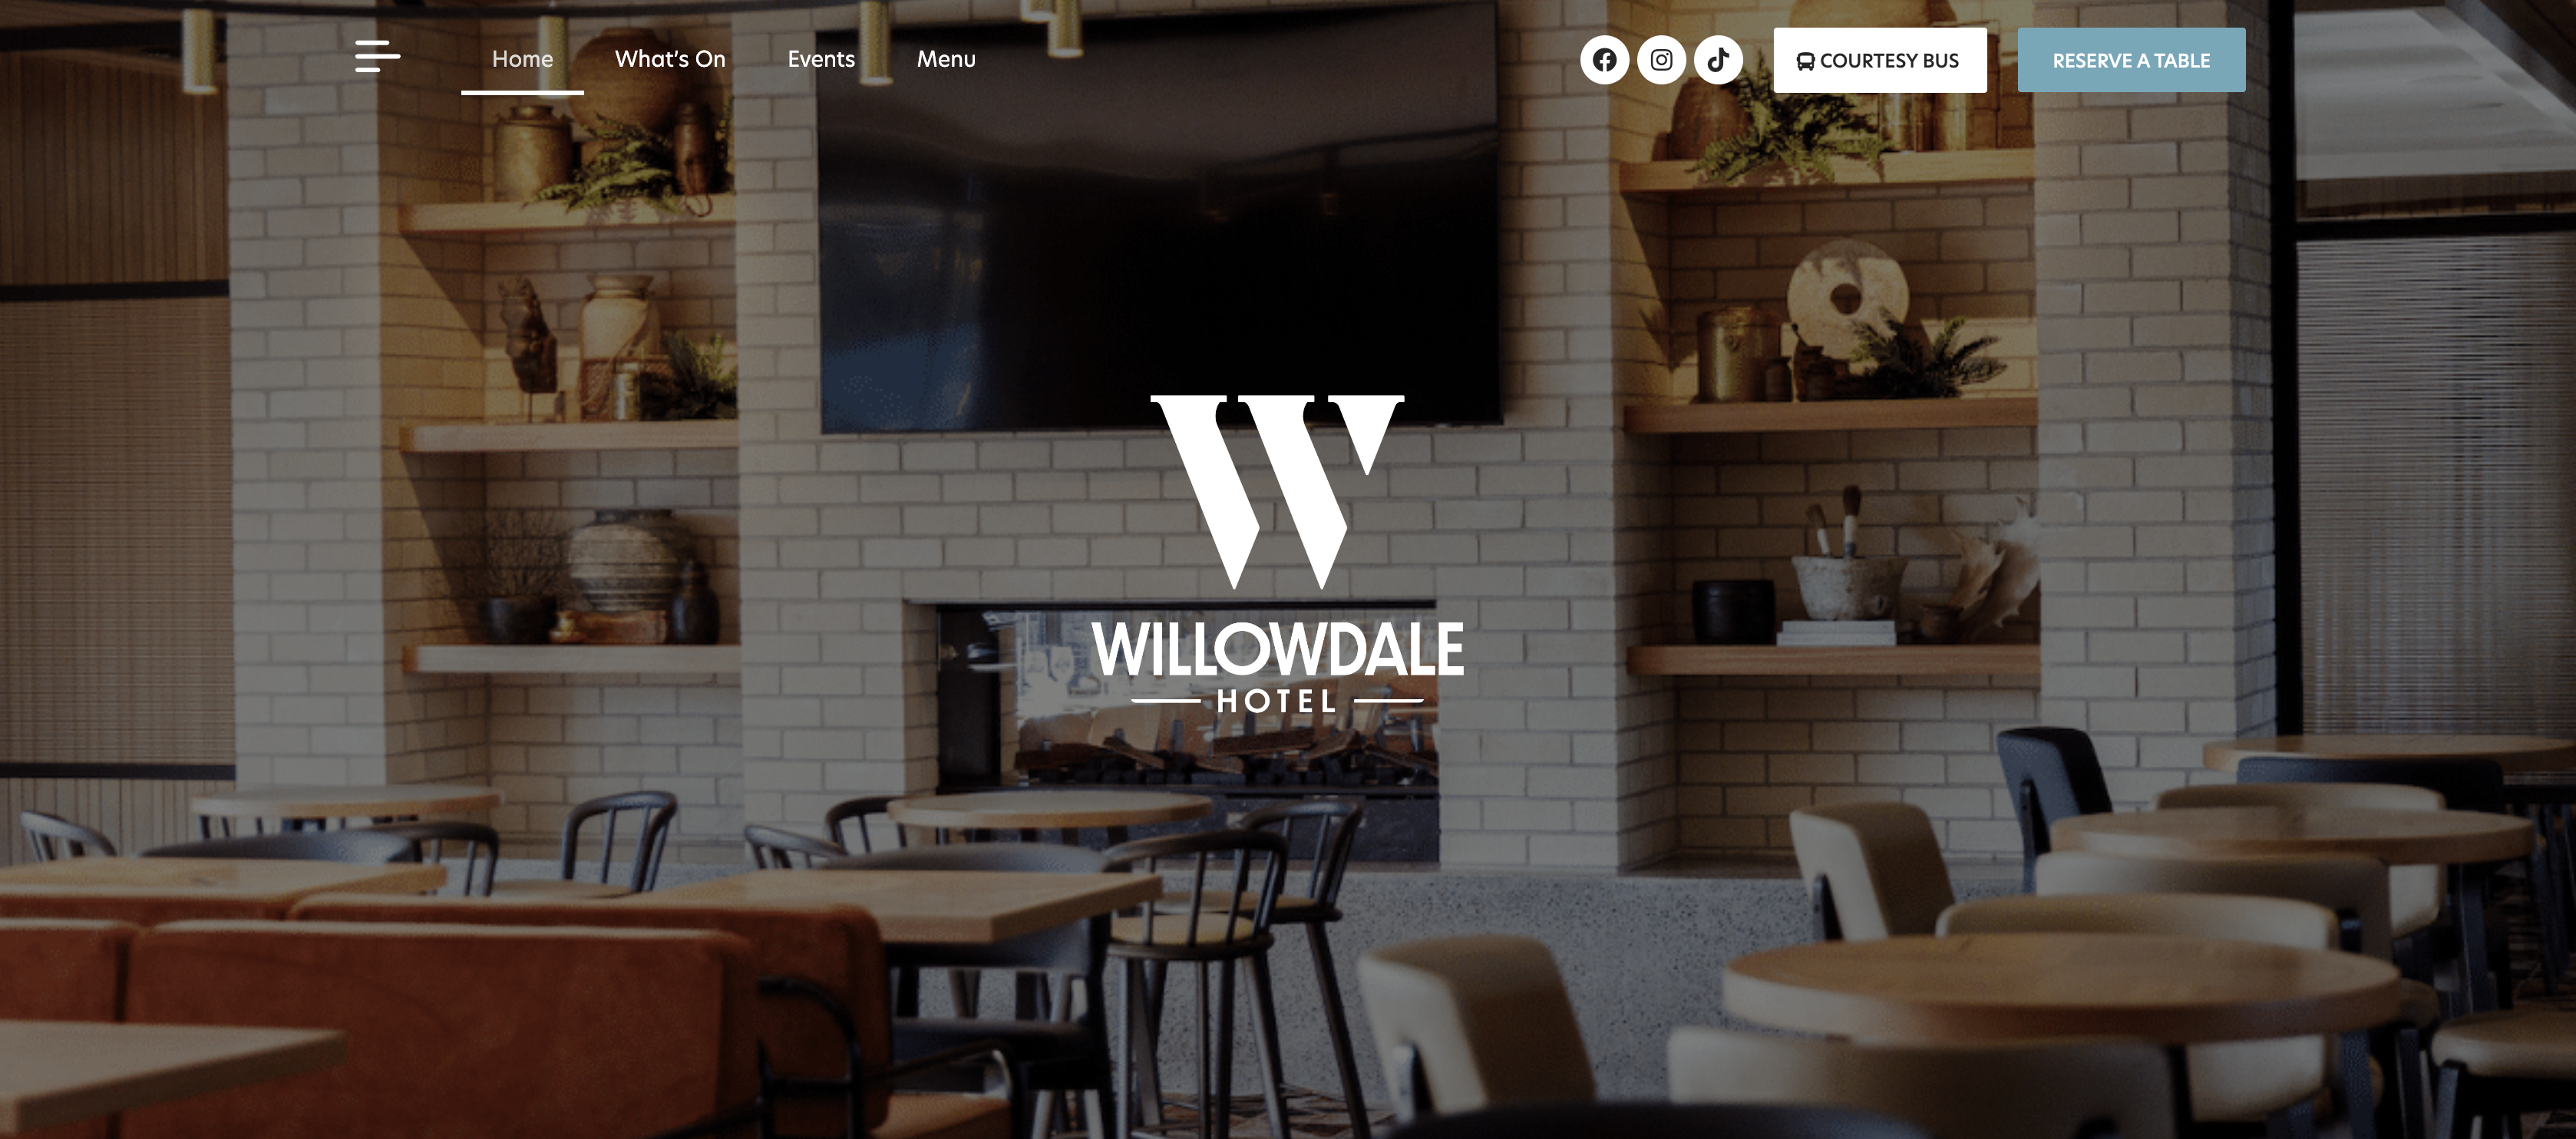 Willowdale Hotel - Case Study